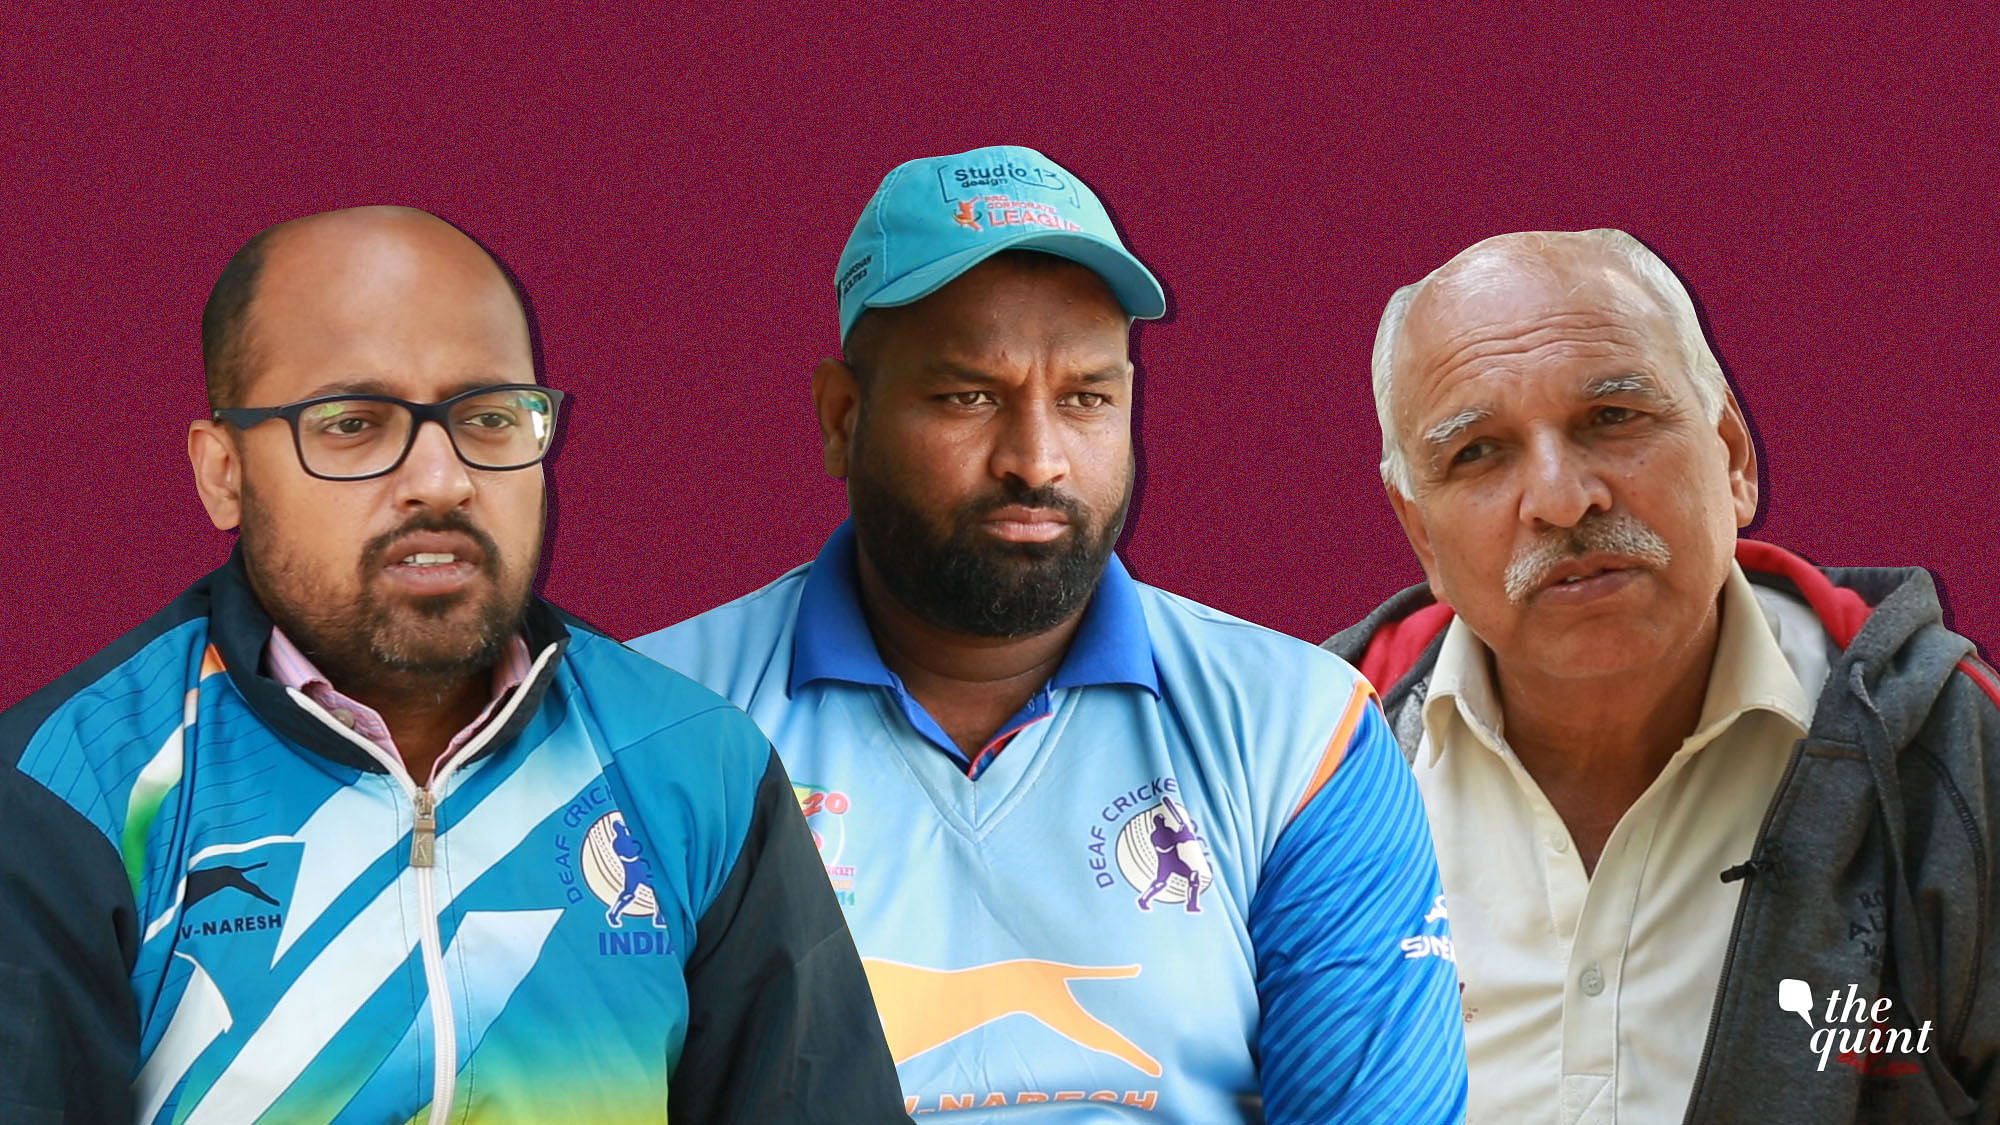 General Secretary of DCS Sumit Jain, Indian Deaf Cricket Team’s fast bowler Fahimuddin and supporter of DCS KK Saini speak to The Quint about the growth of deaf cricket in India.